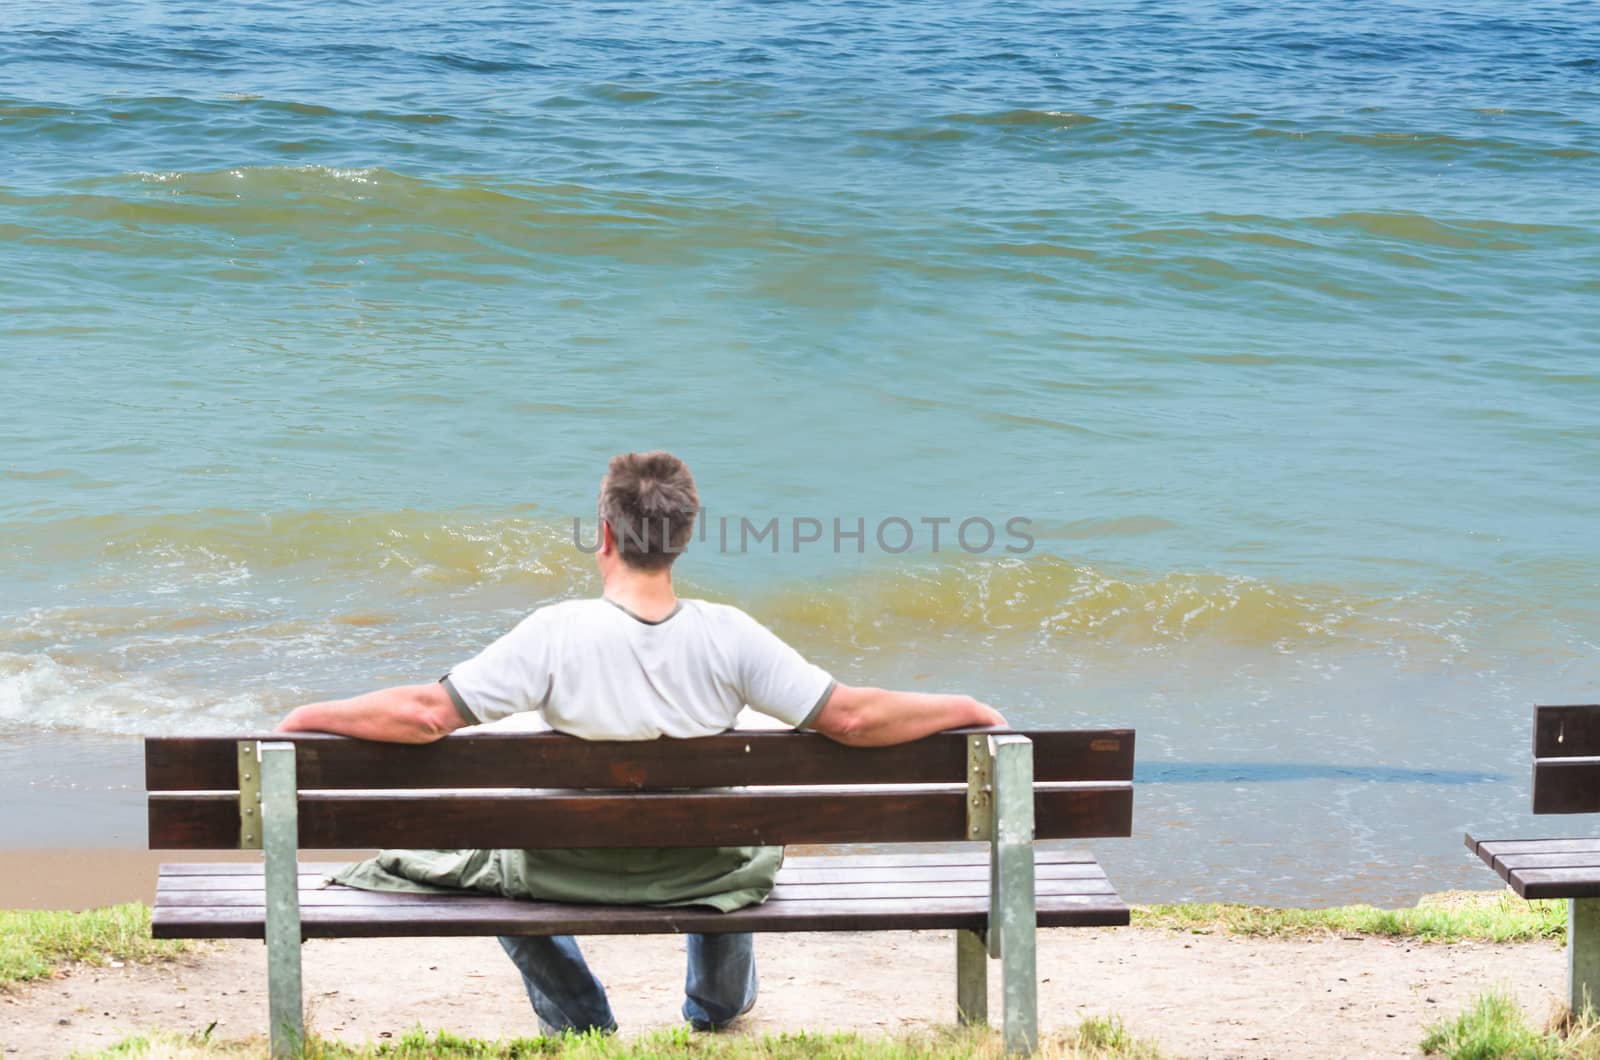  Man on bench, looking out to sea by JFsPic